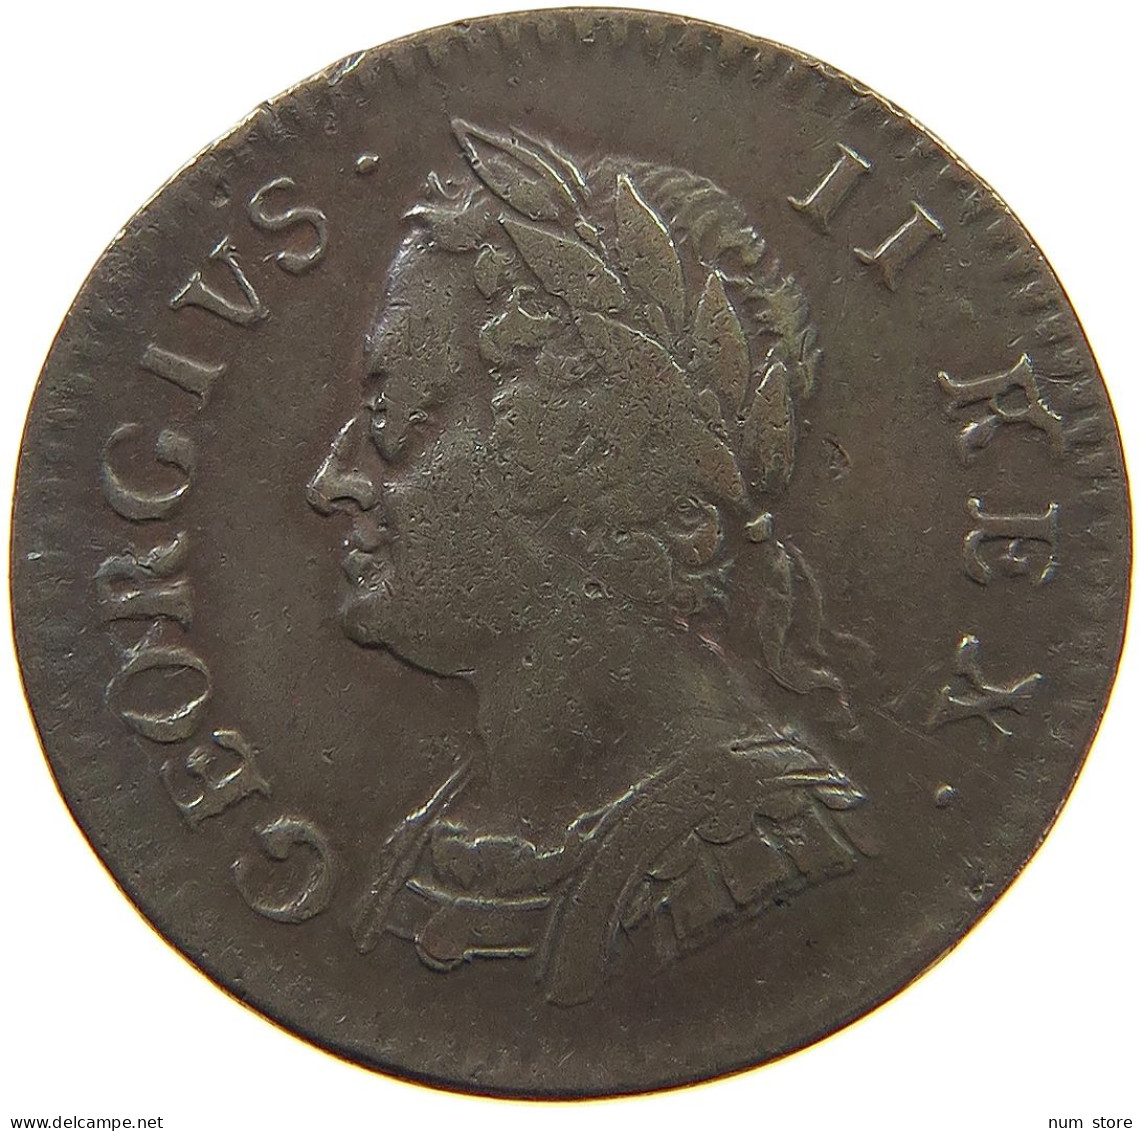 GREAT BRITAIN FARTHING 1754 George II. 1727-1760. #t117 1093 - A. 1 Farthing